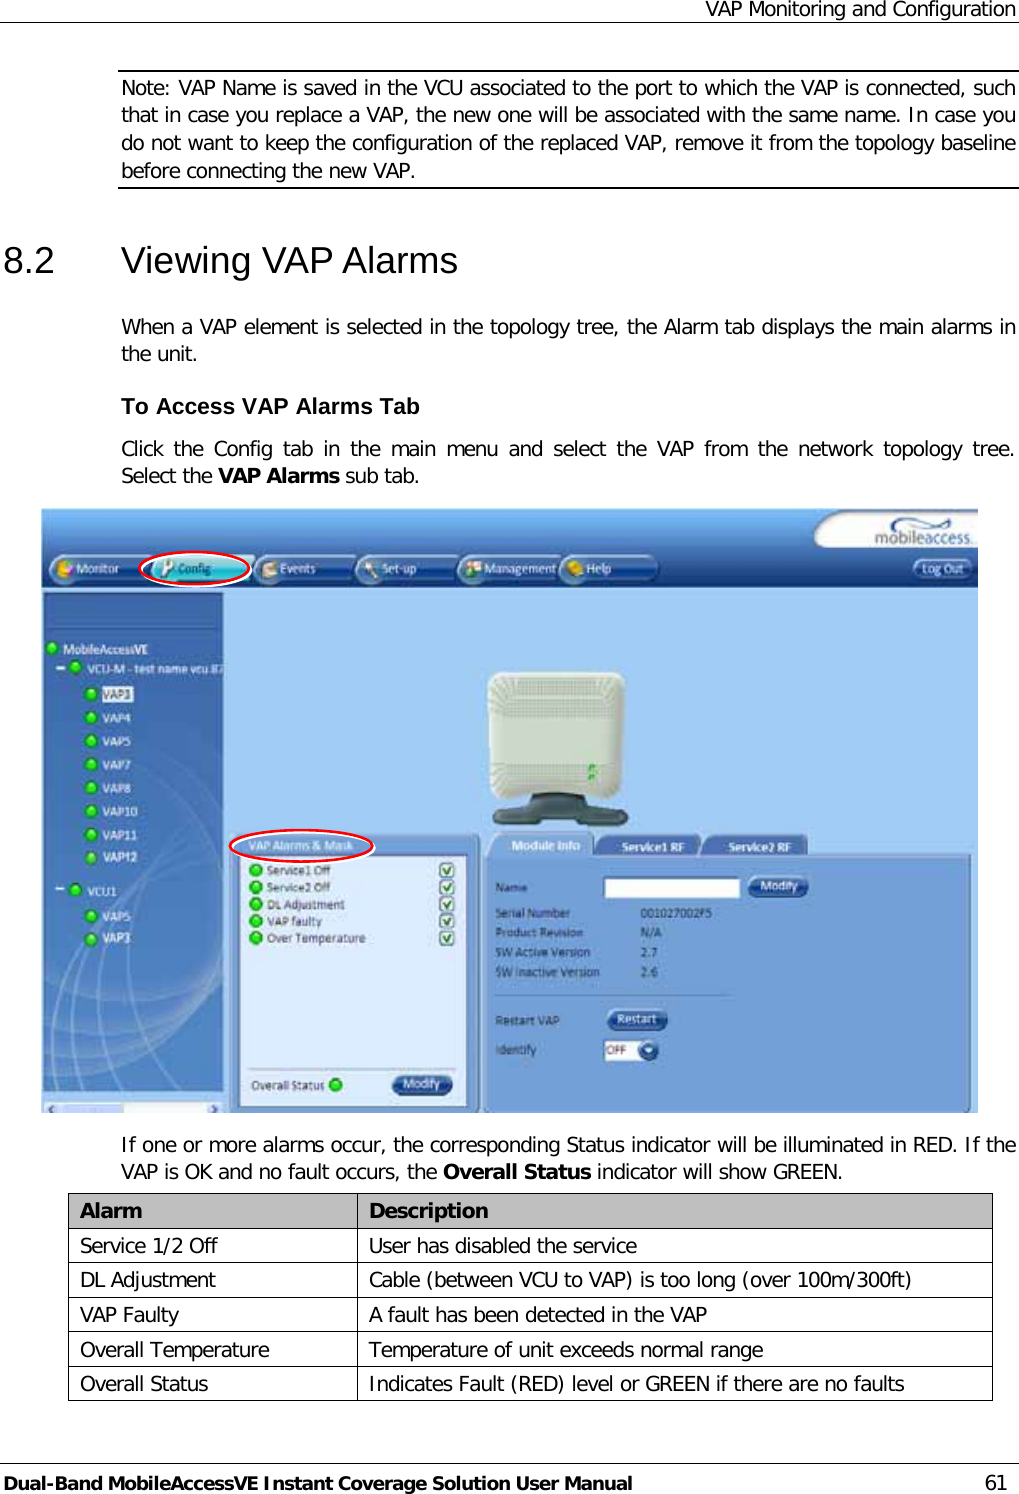 VAP Monitoring and Configuration Dual-Band MobileAccessVE Instant Coverage Solution User Manual 61 Note: VAP Name is saved in the VCU associated to the port to which the VAP is connected, such that in case you replace a VAP, the new one will be associated with the same name. In case you do not want to keep the configuration of the replaced VAP, remove it from the topology baseline before connecting the new VAP. 8.2  Viewing VAP Alarms  When a VAP element is selected in the topology tree, the Alarm tab displays the main alarms in the unit. To Access VAP Alarms Tab  Click the Config tab in the main menu and select the VAP from the network topology tree.  Select the VAP Alarms sub tab.  If one or more alarms occur, the corresponding Status indicator will be illuminated in RED. If the VAP is OK and no fault occurs, the Overall Status indicator will show GREEN. Alarm Description Service 1/2 Off User has disabled the service DL Adjustment Cable (between VCU to VAP) is too long (over 100m/300ft)  VAP Faulty A fault has been detected in the VAP Overall Temperature Temperature of unit exceeds normal range Overall Status Indicates Fault (RED) level or GREEN if there are no faults 